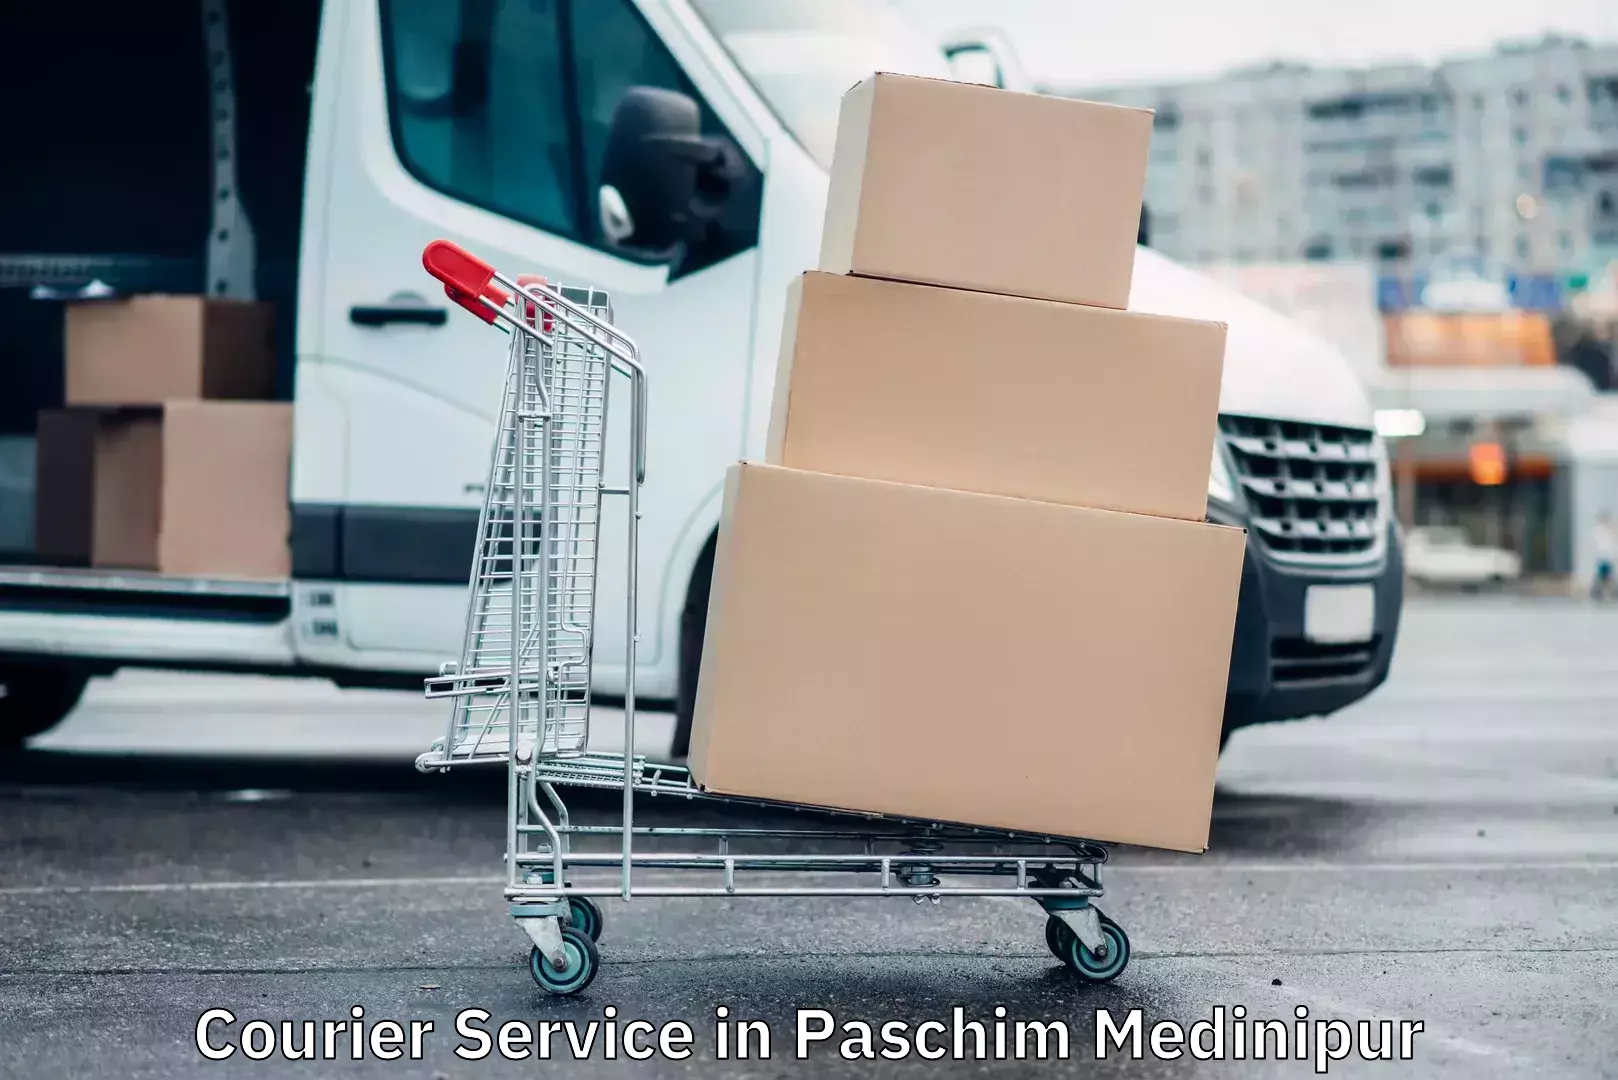 Personalized courier experiences in Paschim Medinipur